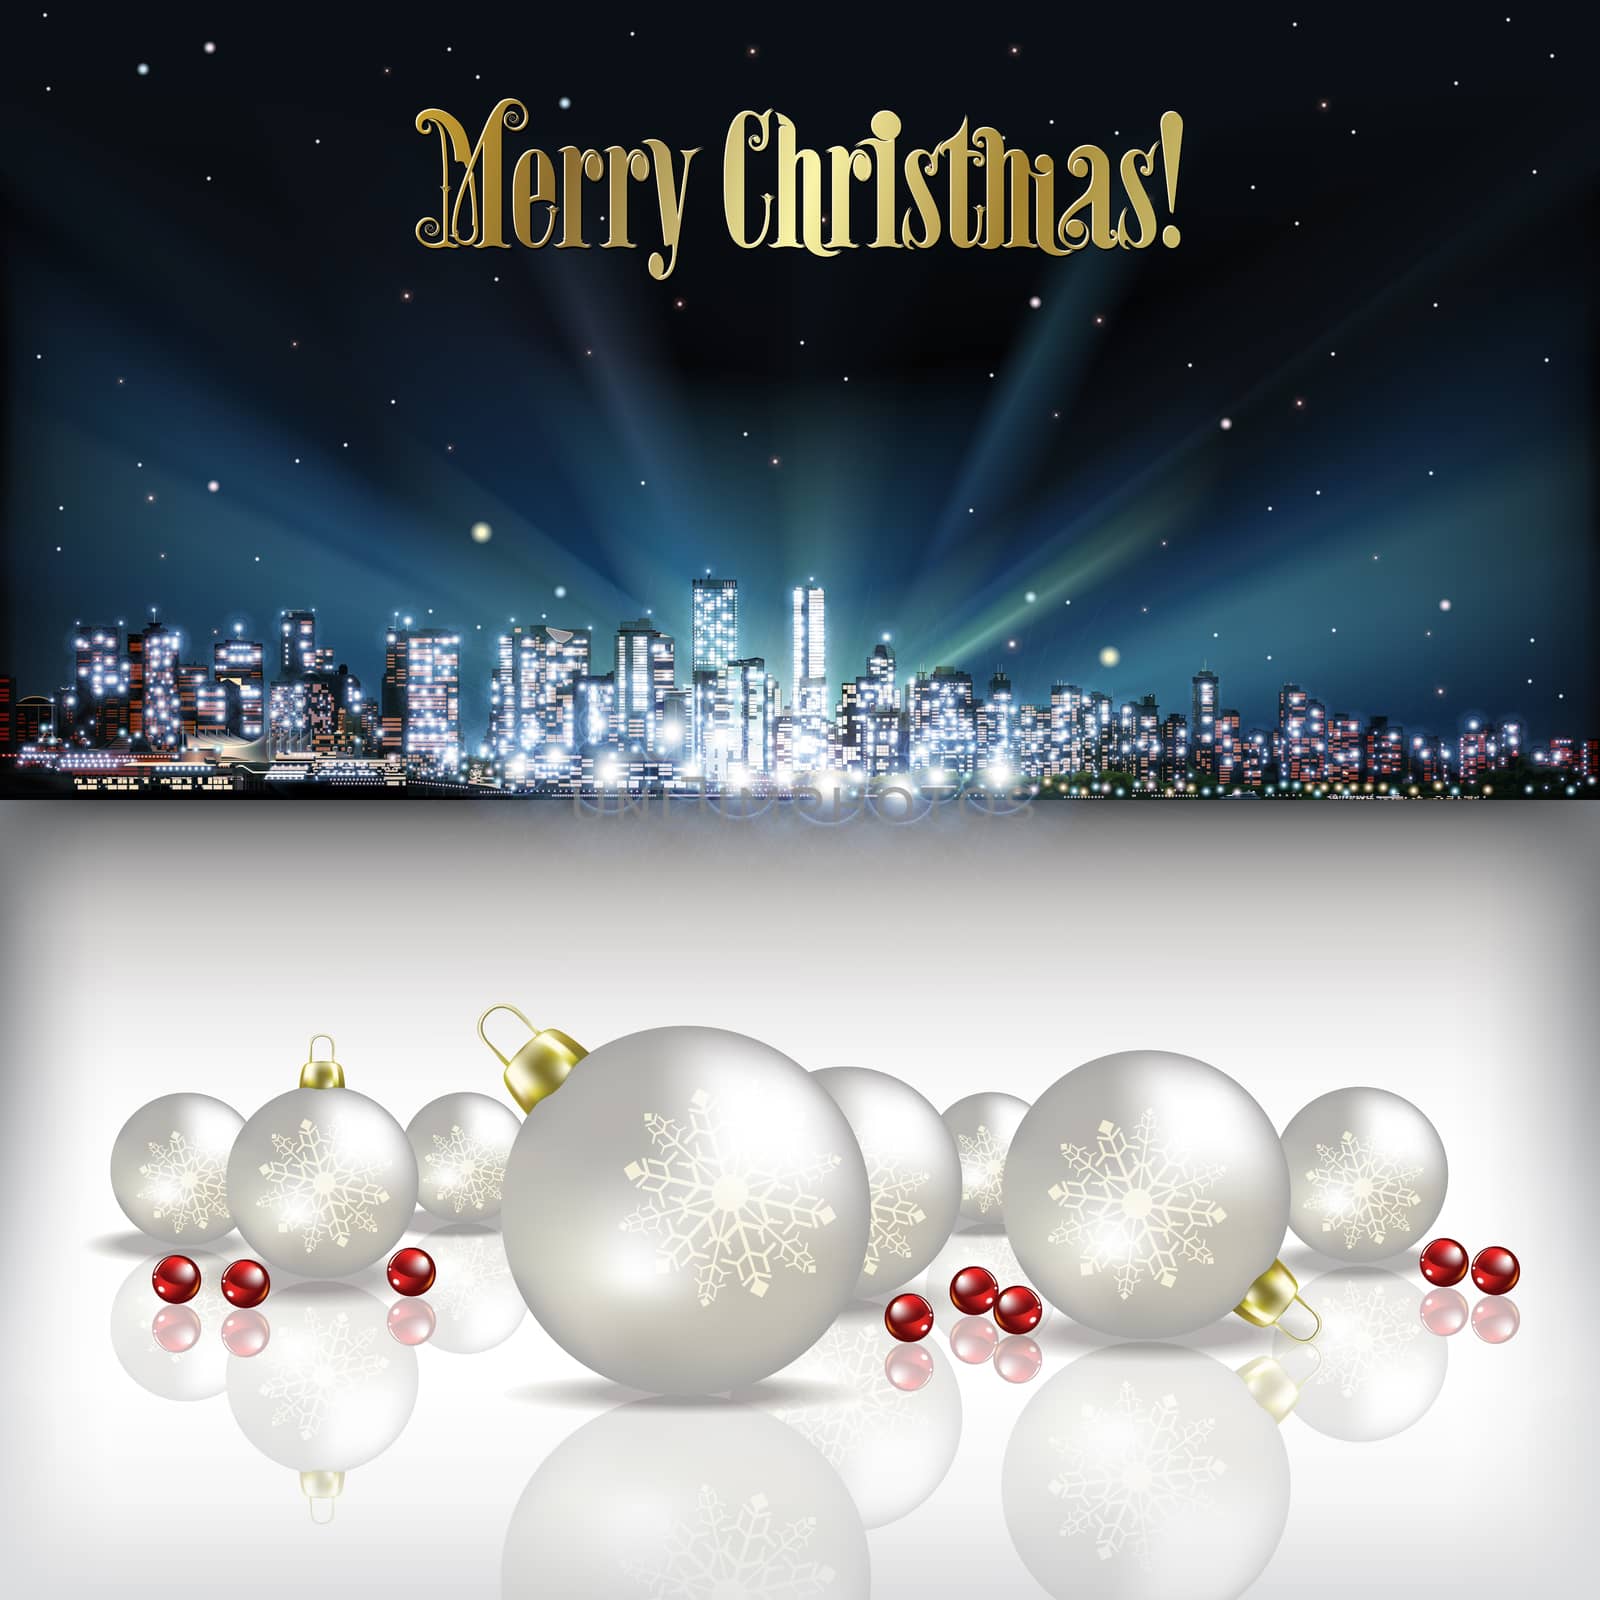 Abstract Christmas vector illustration with silhouette of city and white decorations